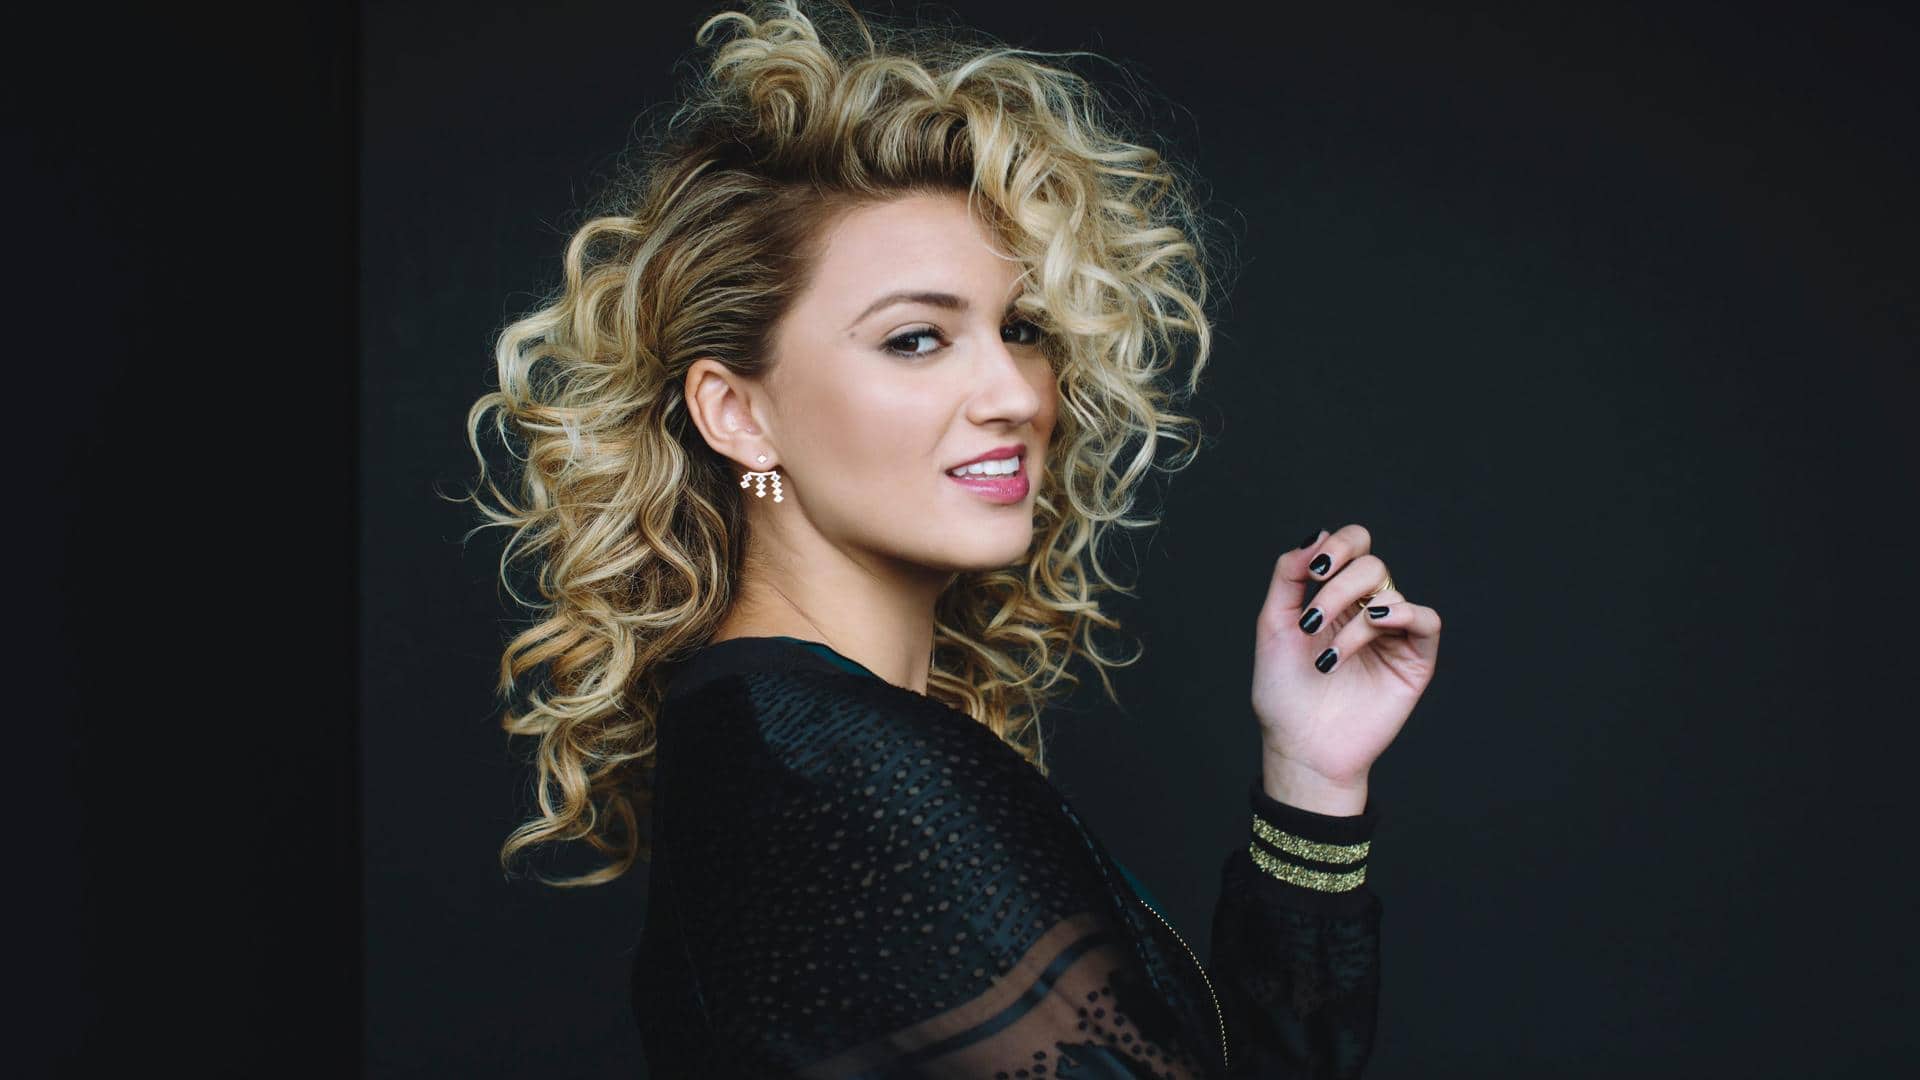 Tori Kelly health crisis: Singer collapses; hospitalized for blood clots